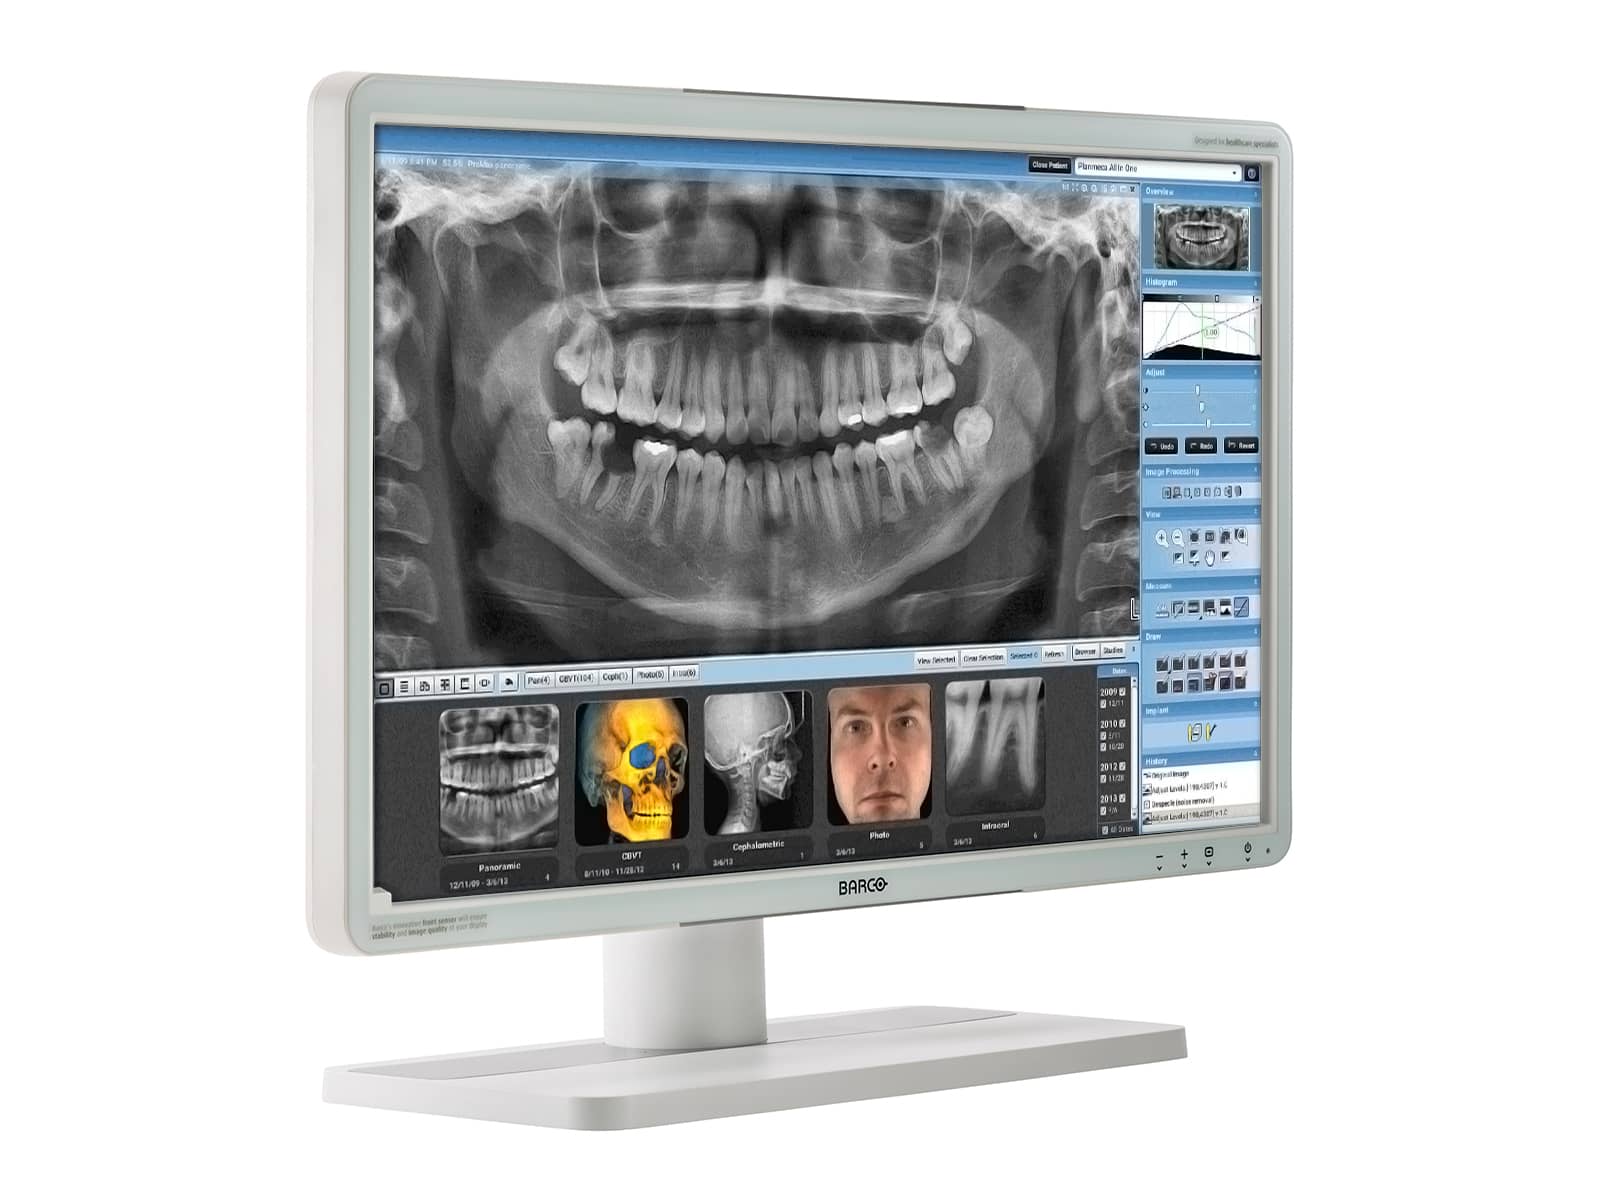 Barco Eonis MDRC-2224 MKII 2MP 24" Color LED Clinical Review Display Monitors.com 